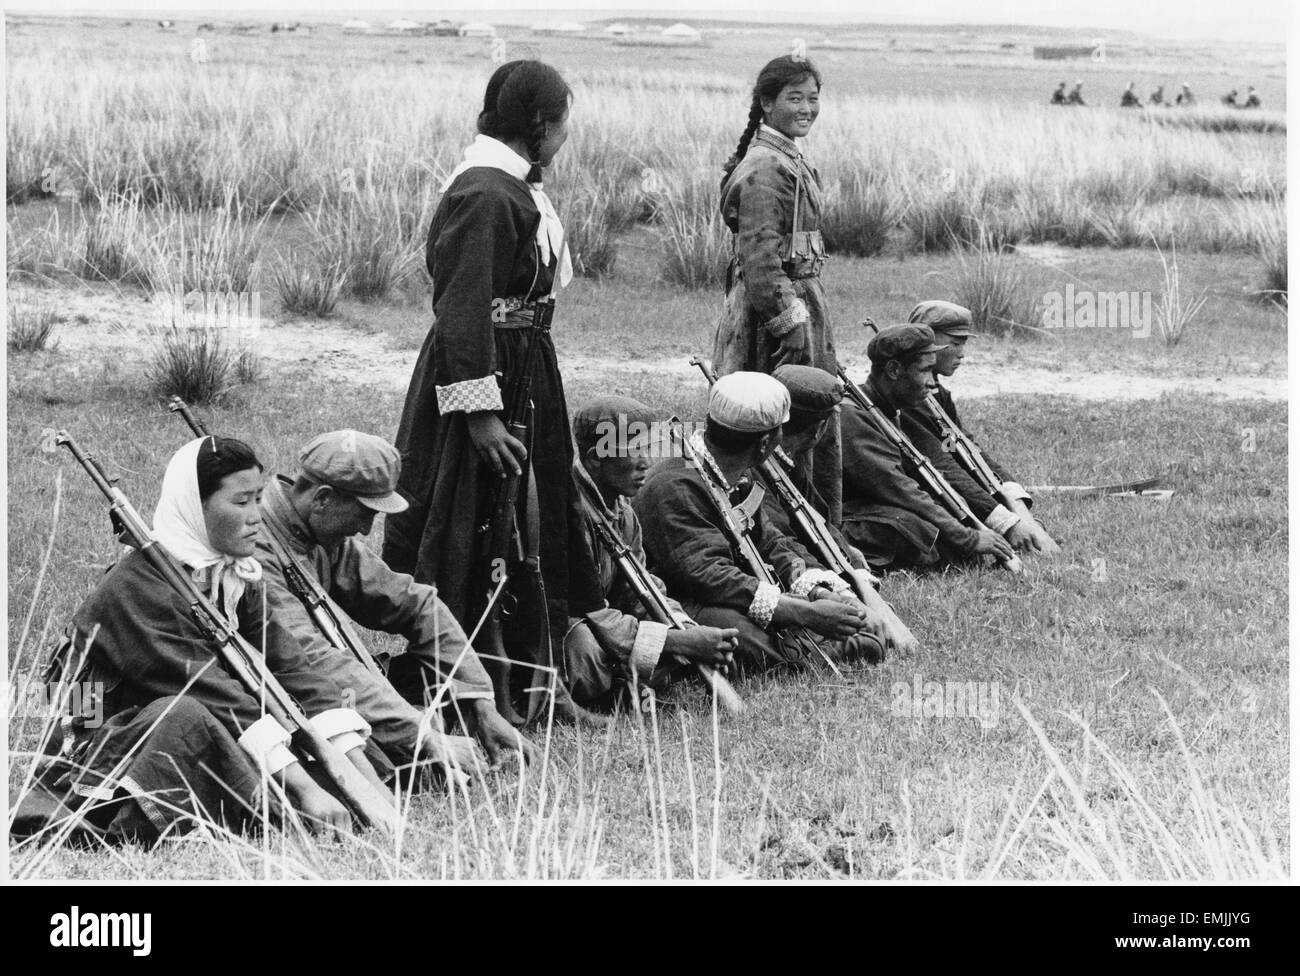 “Militia Team in Shilingala Inner Mongolia”, Film Still, from the Documentary Film 'Report from China', photo by Bob Kass, 1973 Stock Photo